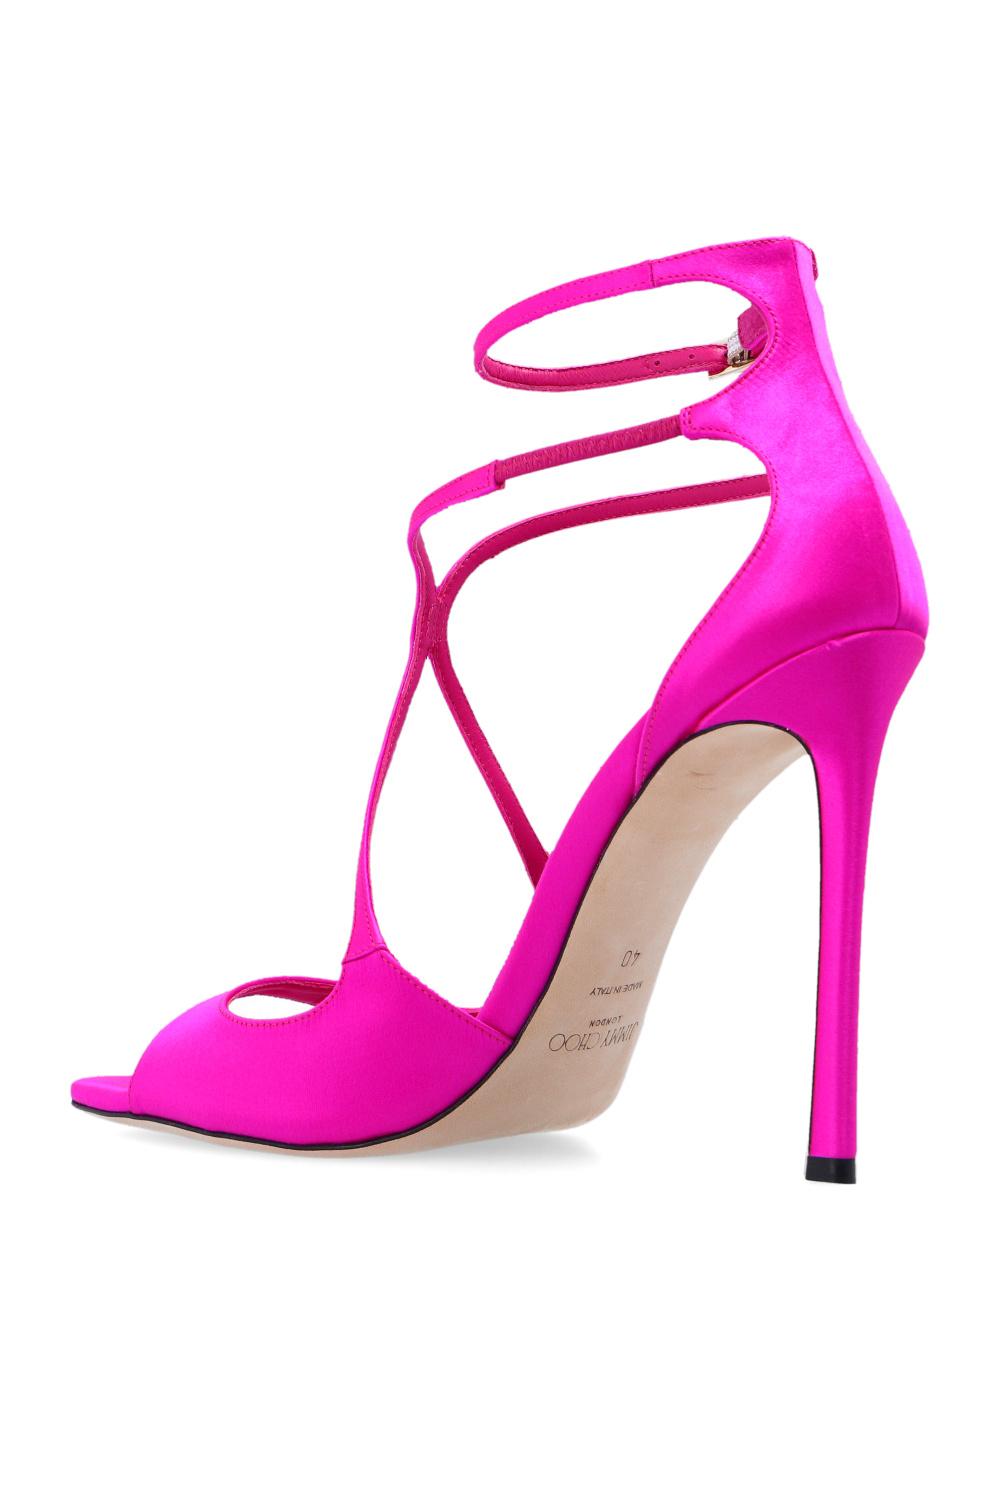 Jimmy Choo 'azia' Heeled Sandals in Pink | Lyst